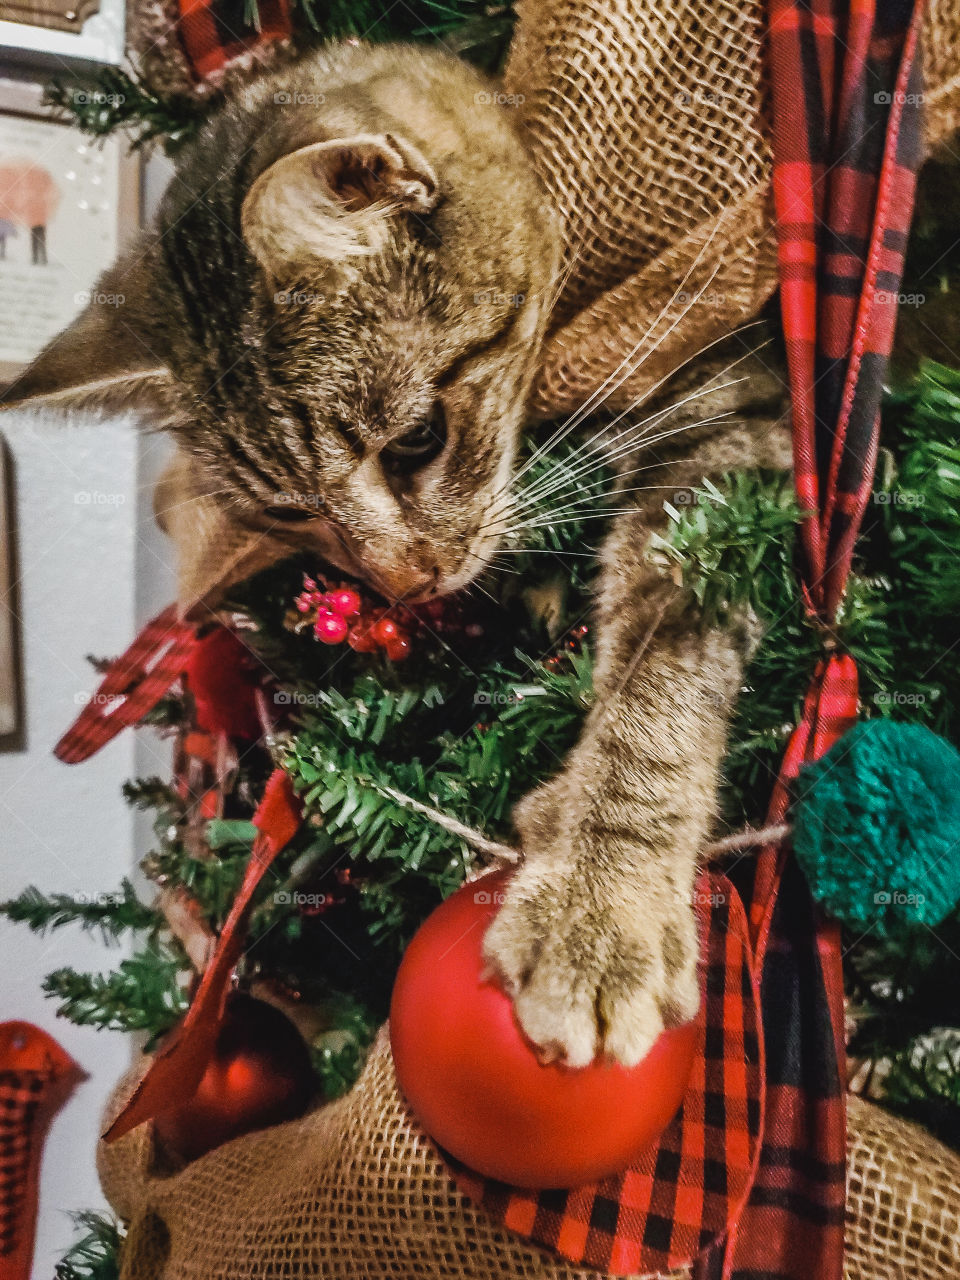 Mischievous tabby cat caught red handed! He managed to climb five feet up the Christmas tree to try to get this specific red glass ornament.